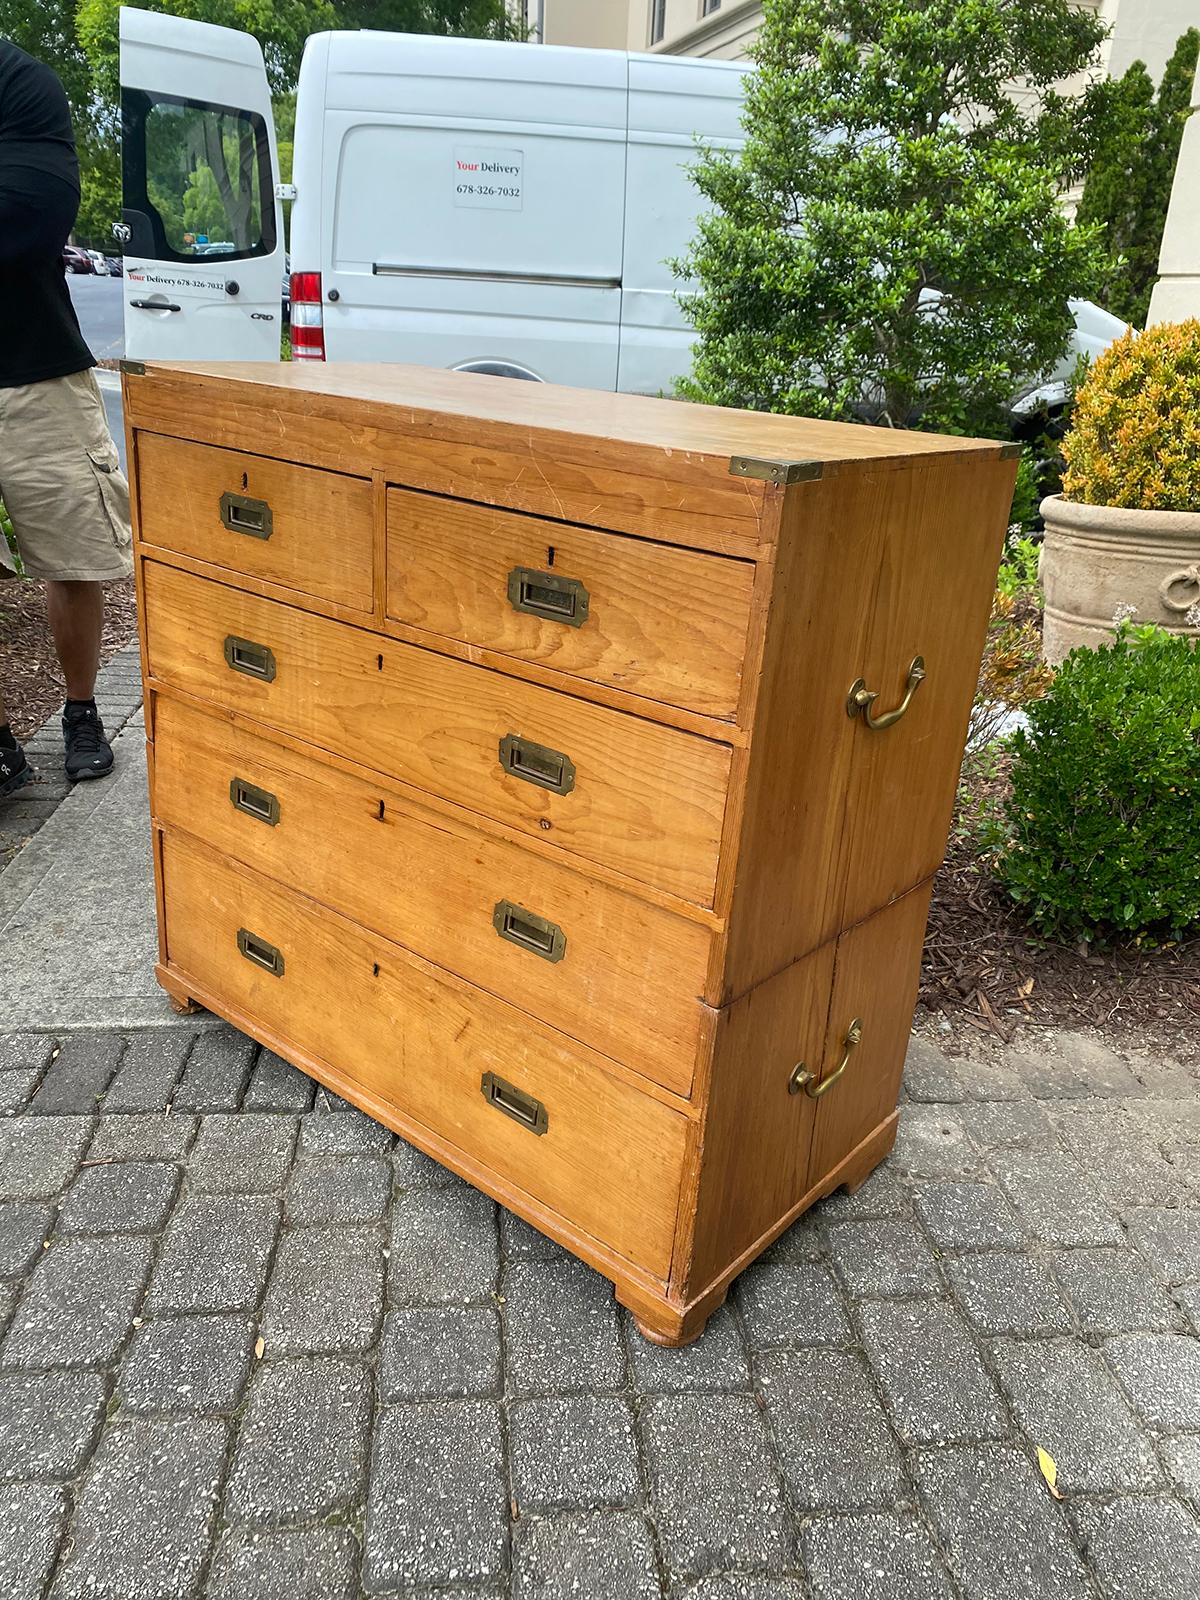 Circa 1880s-1890s English Pine Campaign Chest of Drawers In Good Condition For Sale In Atlanta, GA